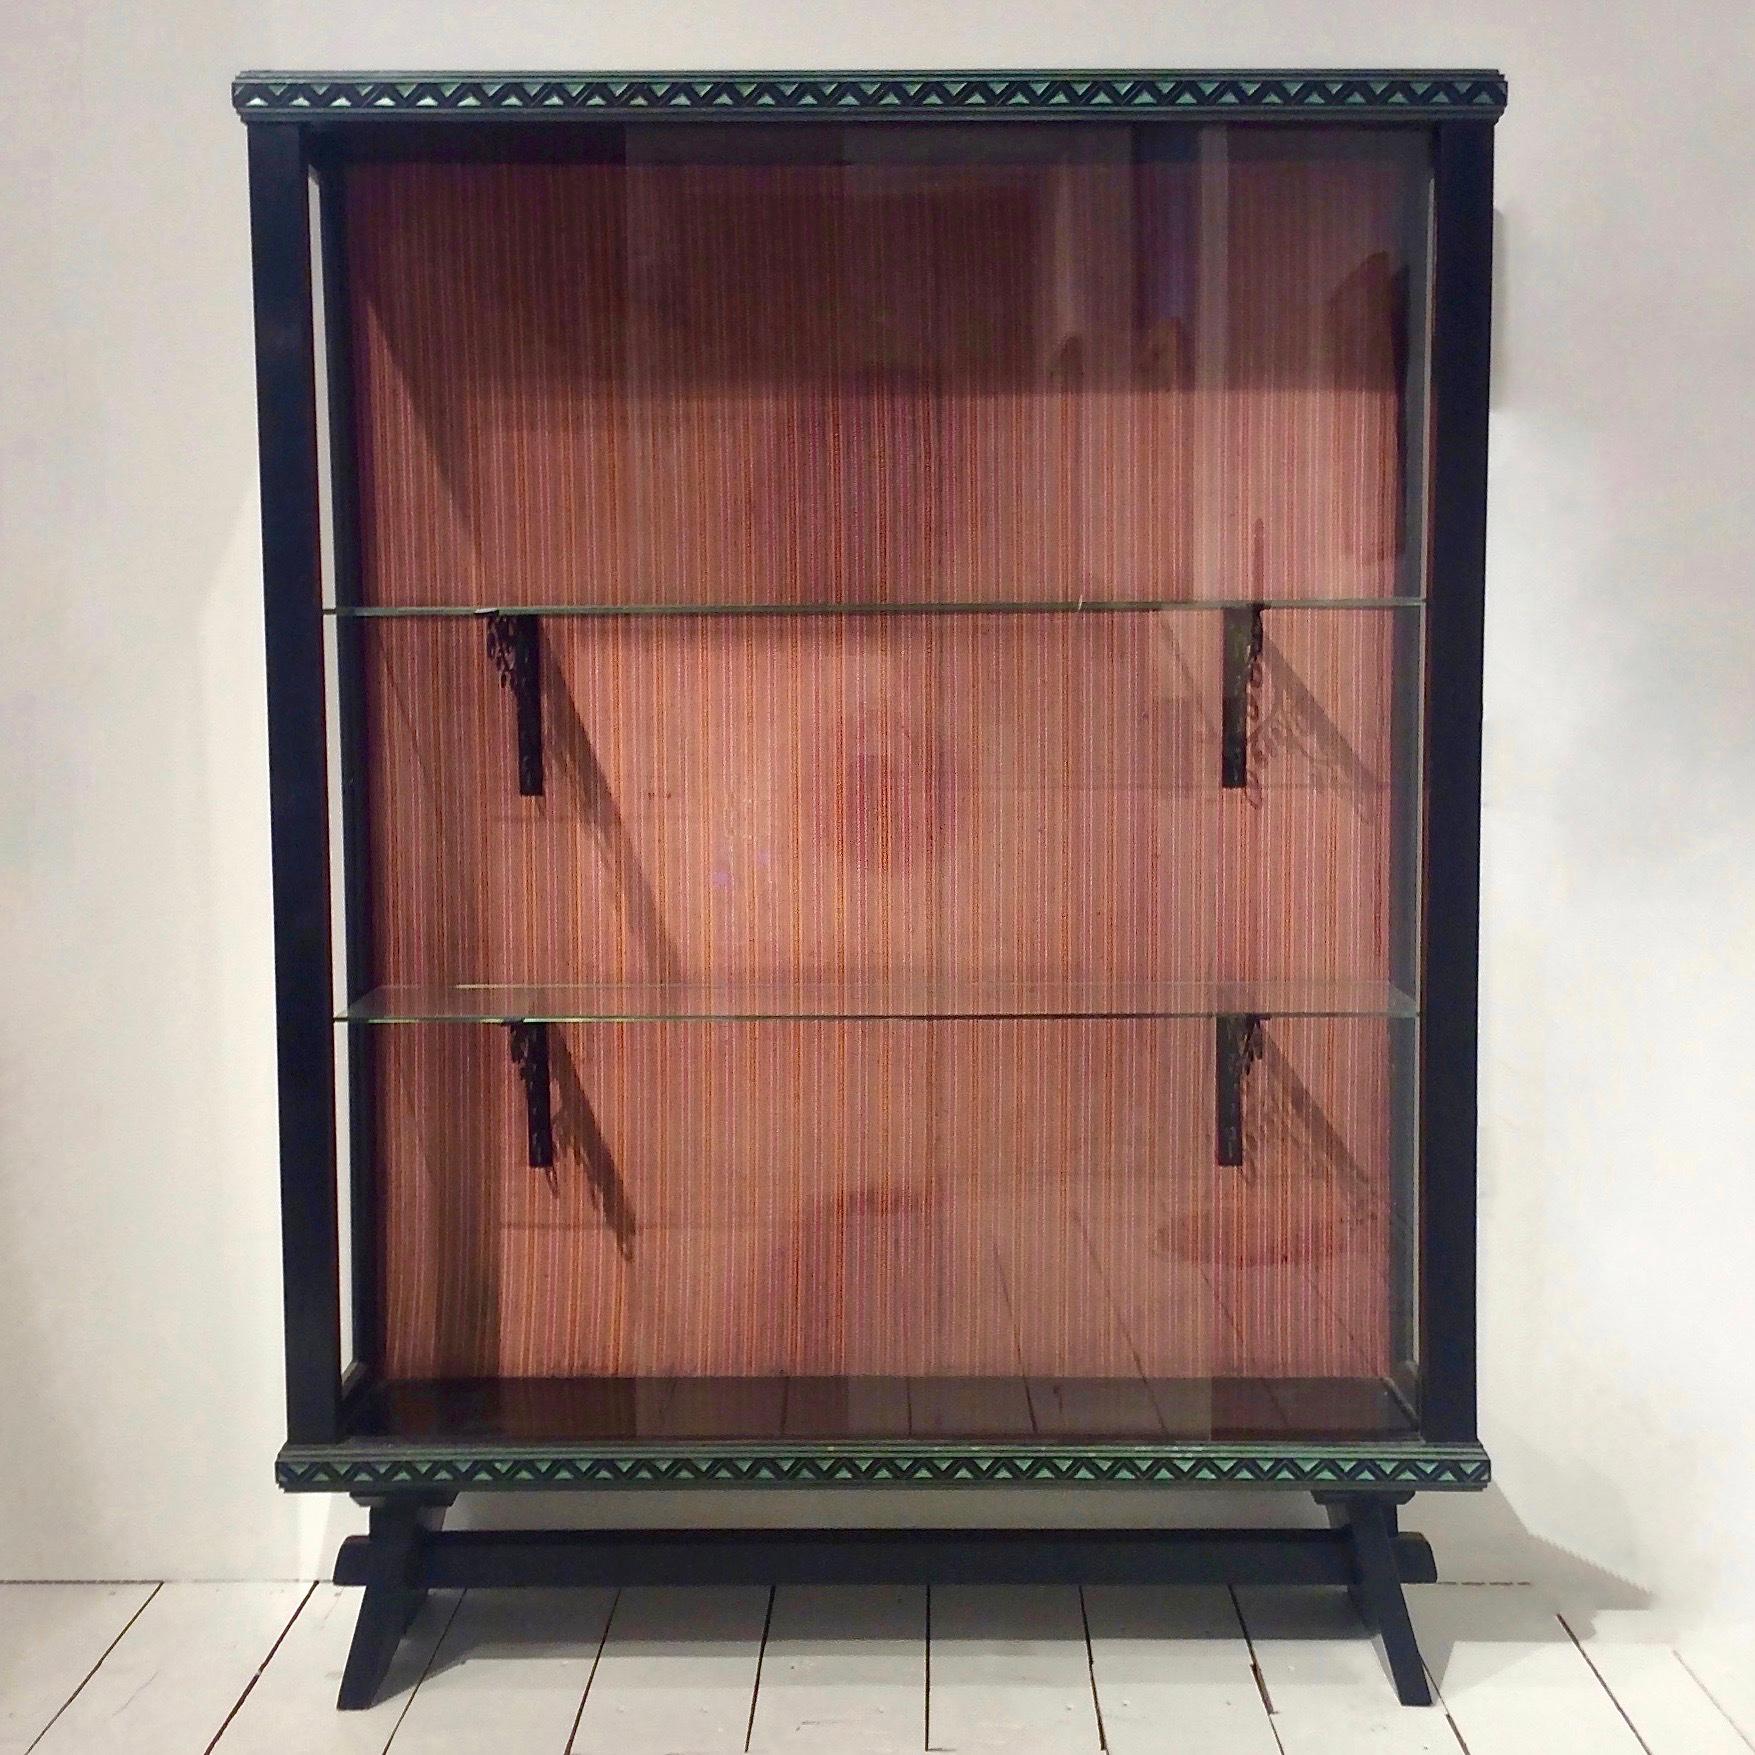 Rare Ettore Zaccari display cabinet, circa 1910, Italy.
Carved and stained oak.
Two sliding glass doors, two glass shelves inside with original stripped cotton fabric at the back.
Dimensions: 165 cm H, 123 cm W, 34 cm D.
Original condition.
All